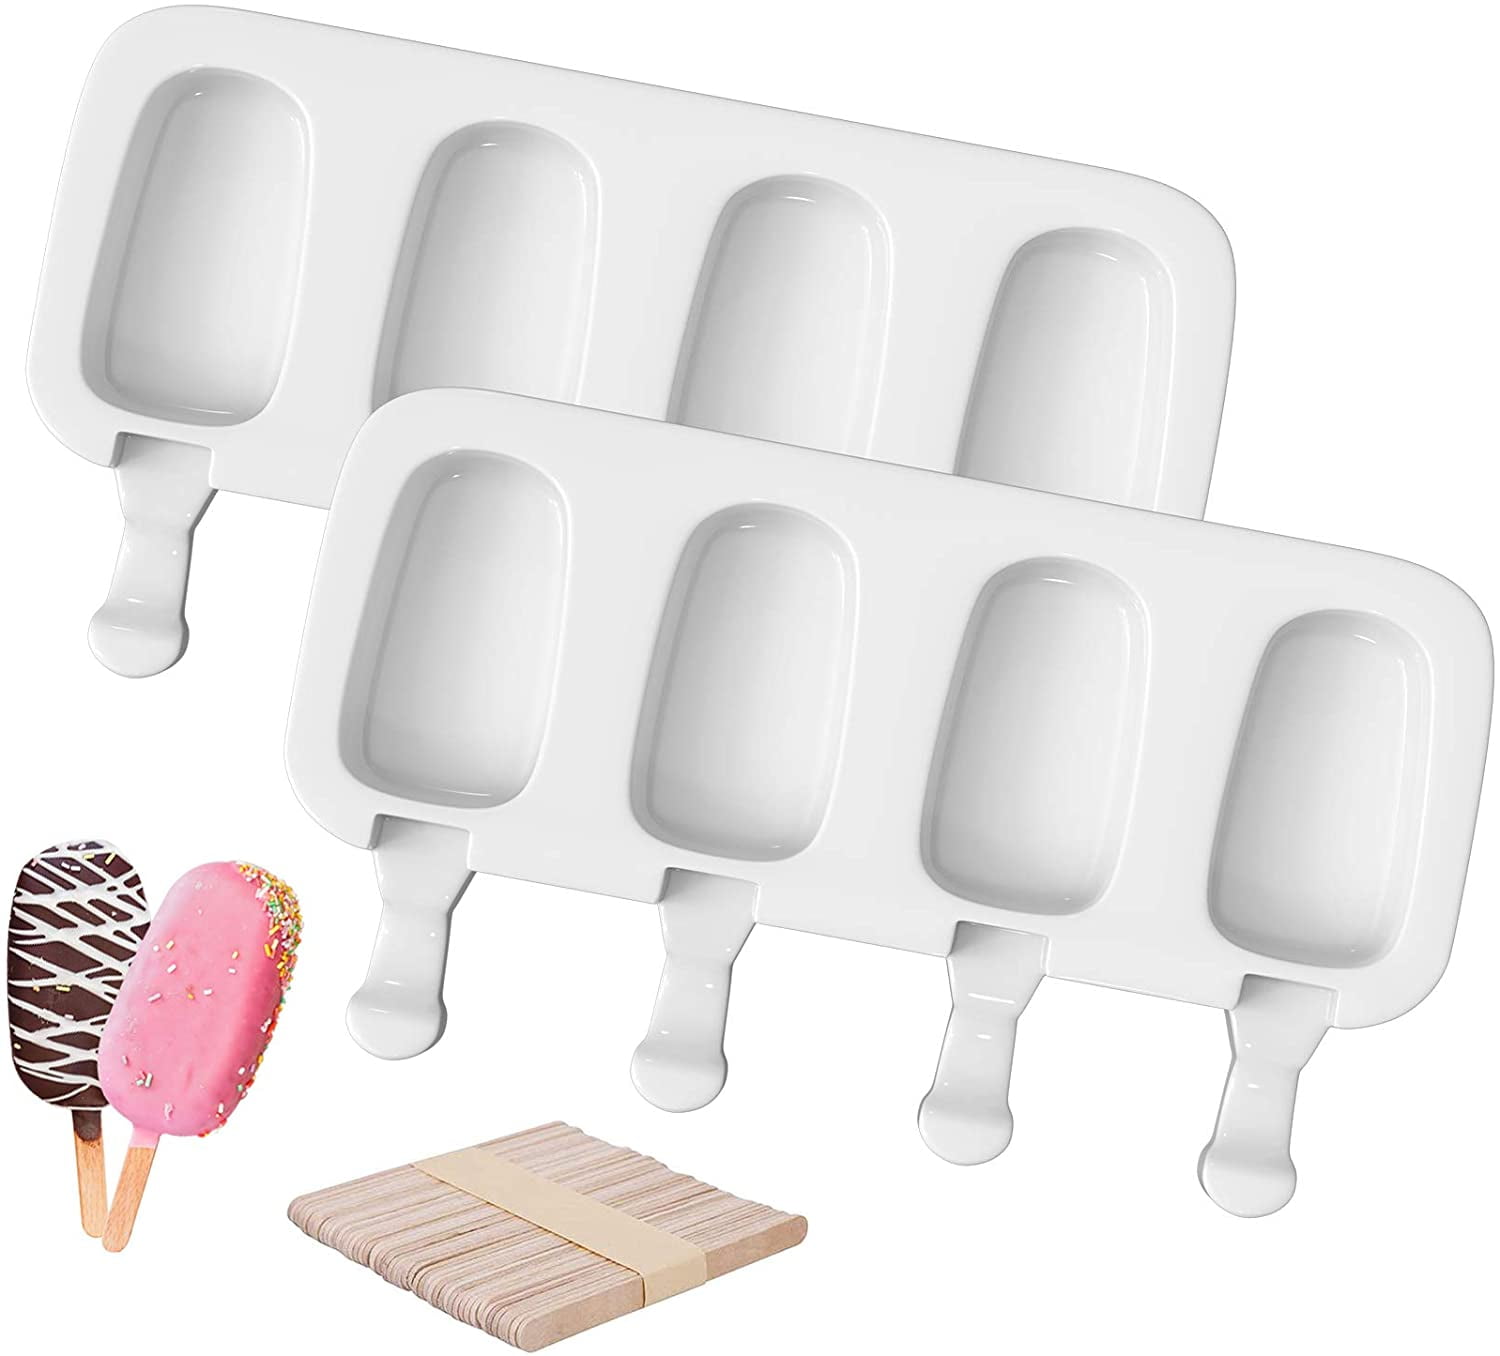 Waybesty 10 Cavities Homemade Popsicle Molds Shapes, Food Grade Silicone  Frozen Ice Popsicle Maker-BPA Free, Contain 100